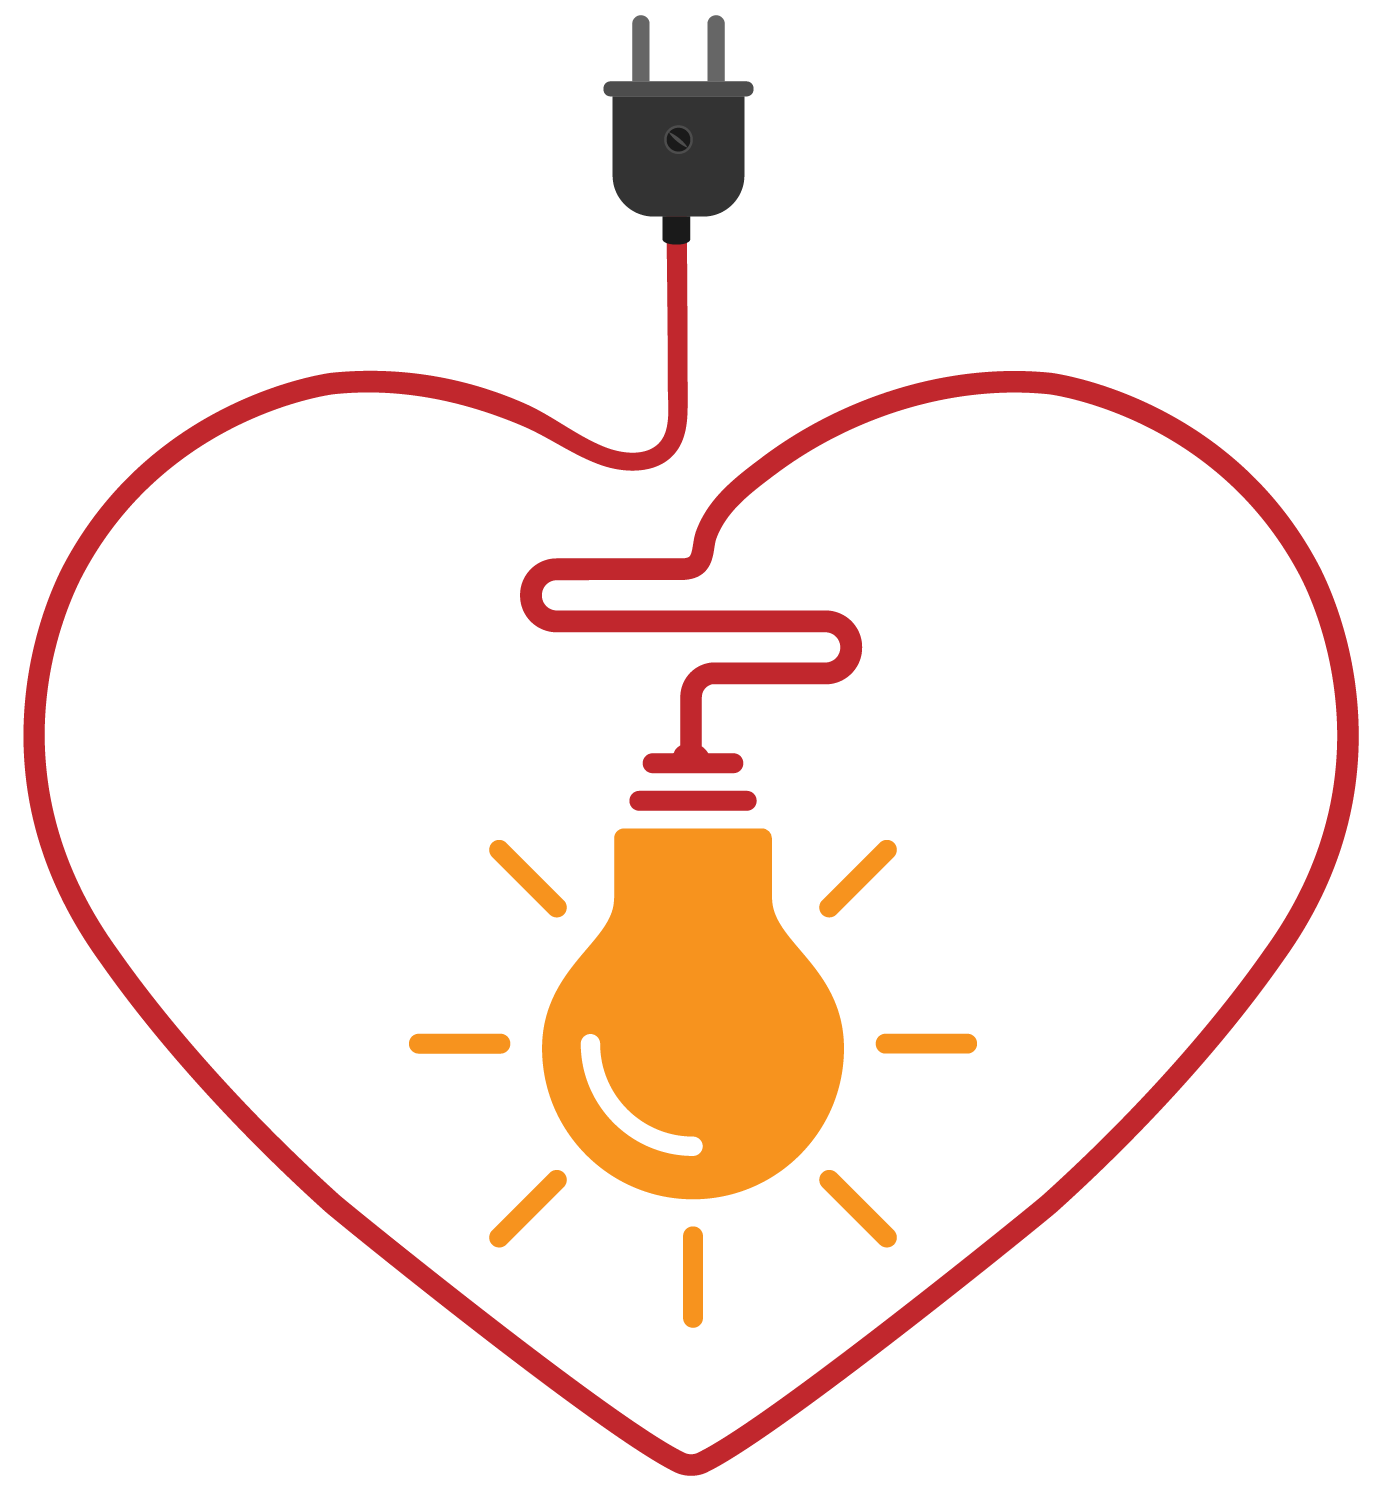 electric wire and shining light bulb curved into shape of heart